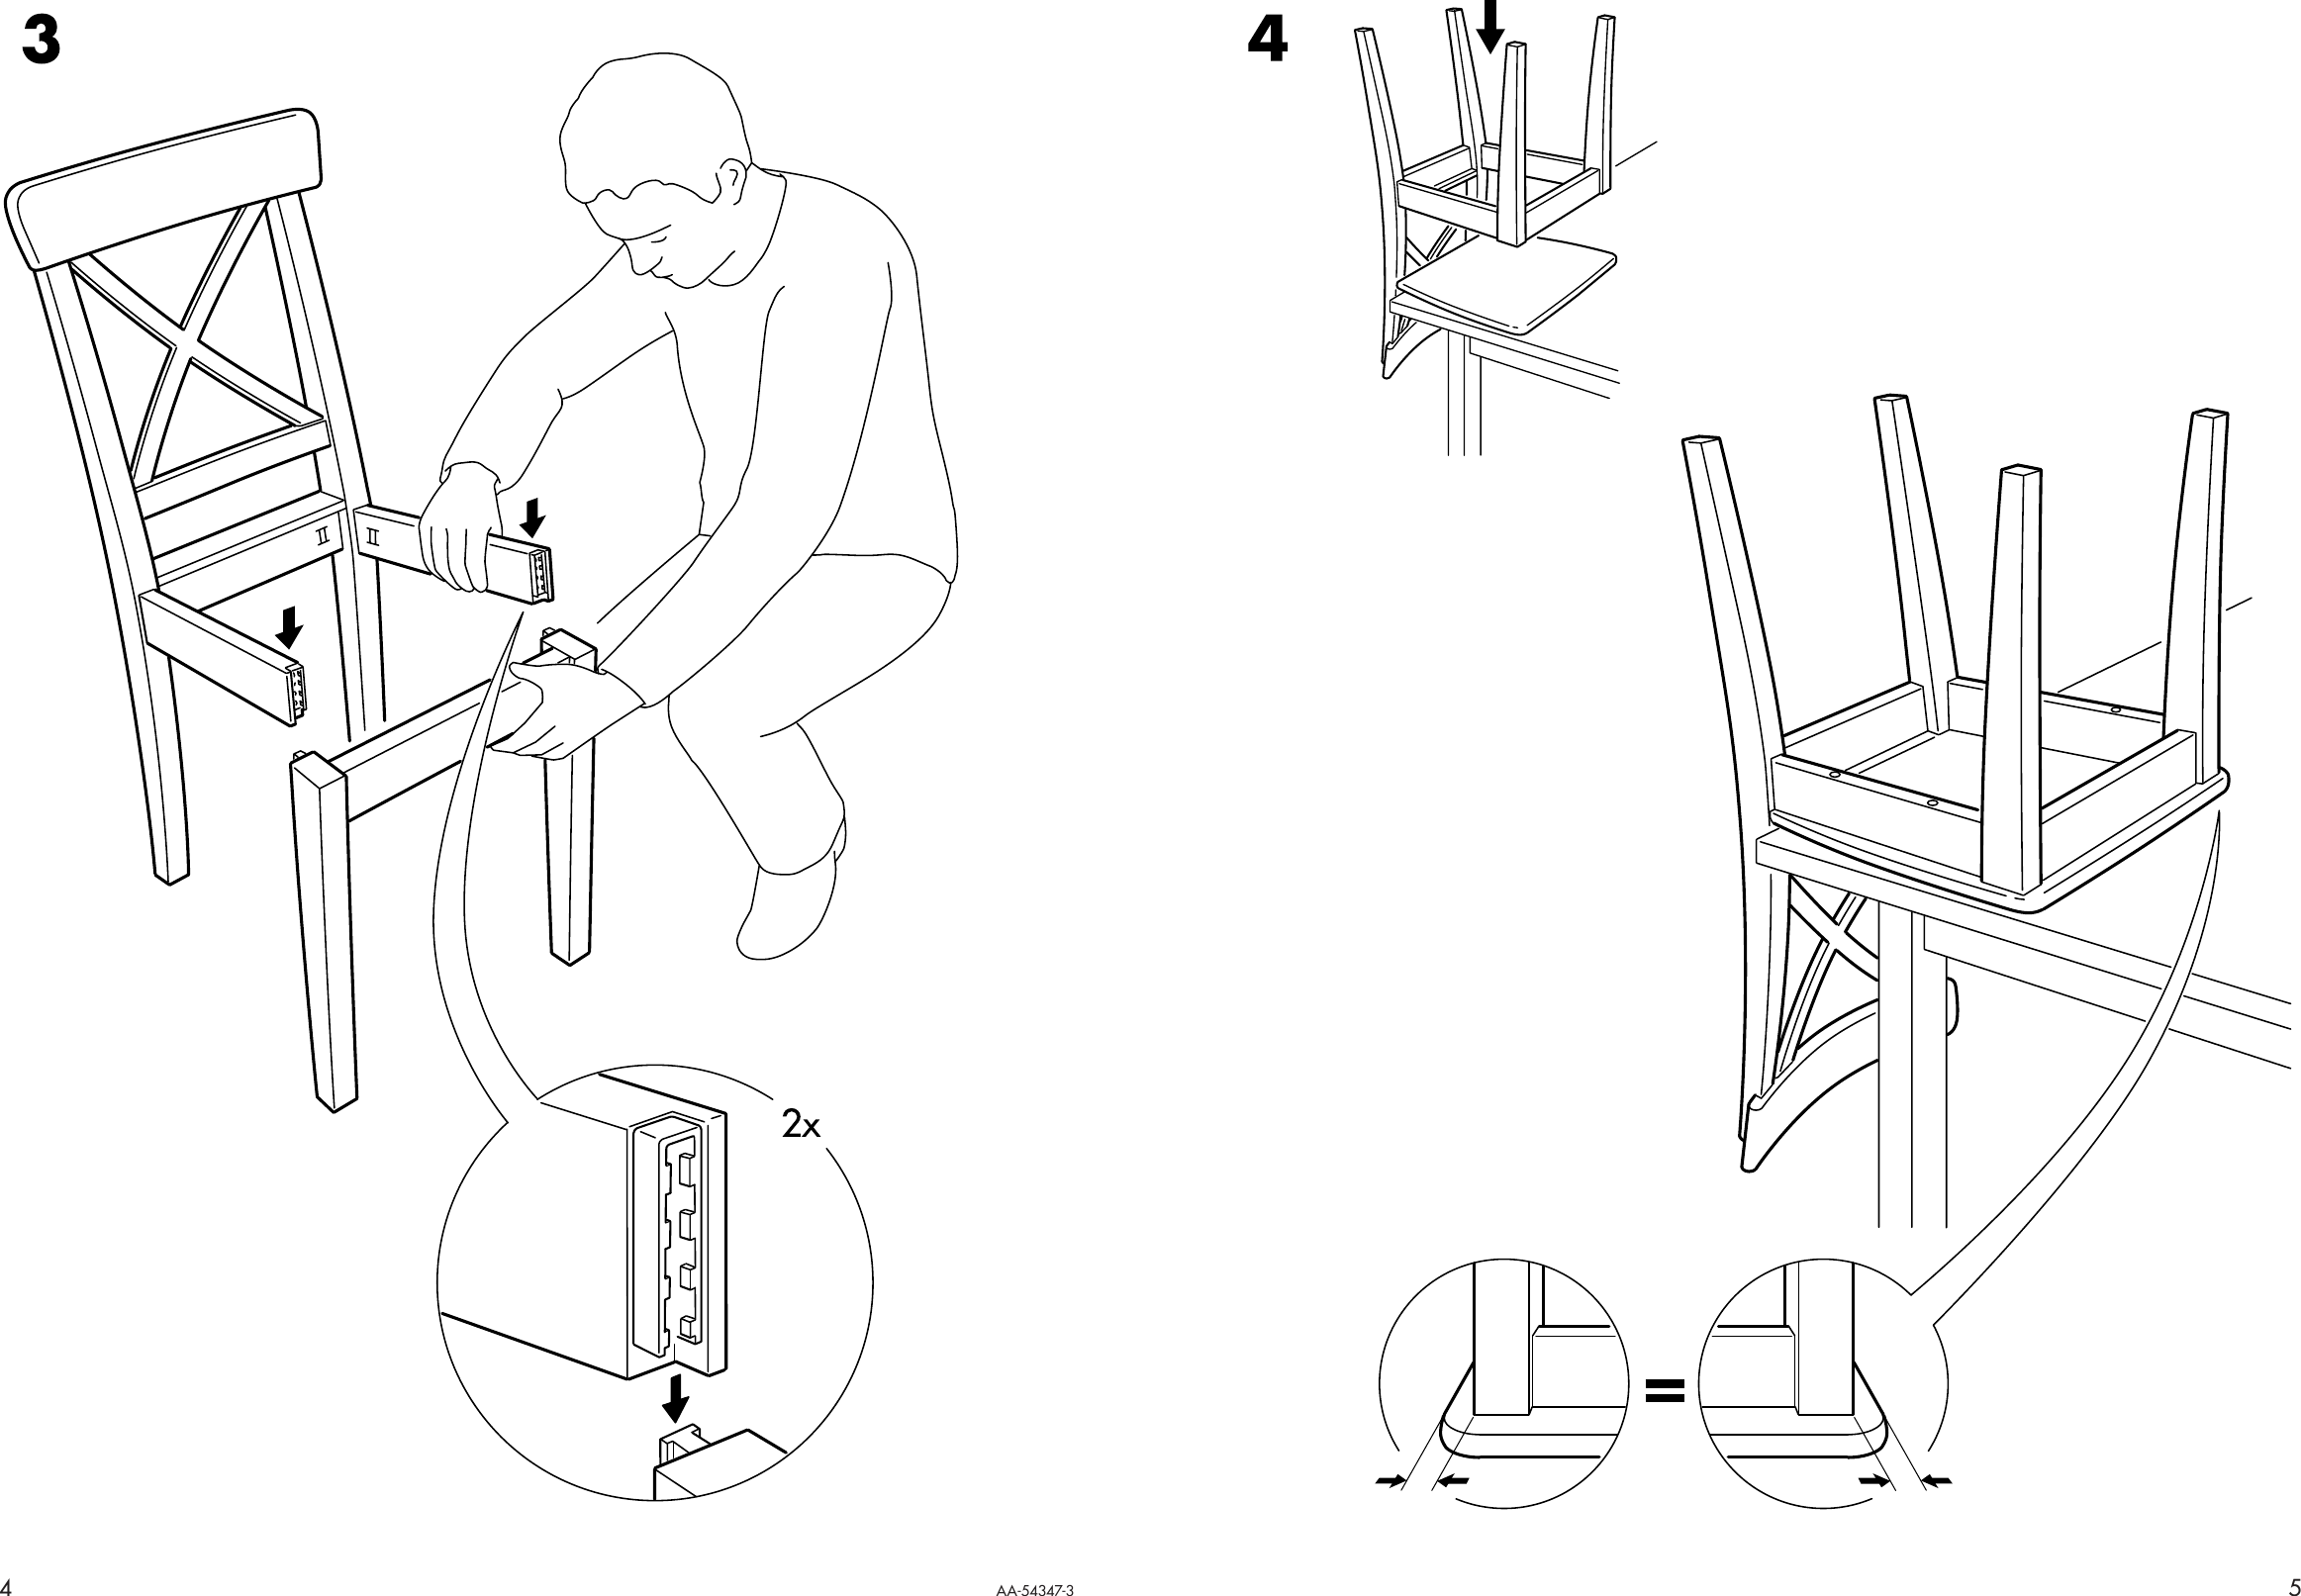 Ikea Armchair Assembly Instructions : Ikea expedit assembly